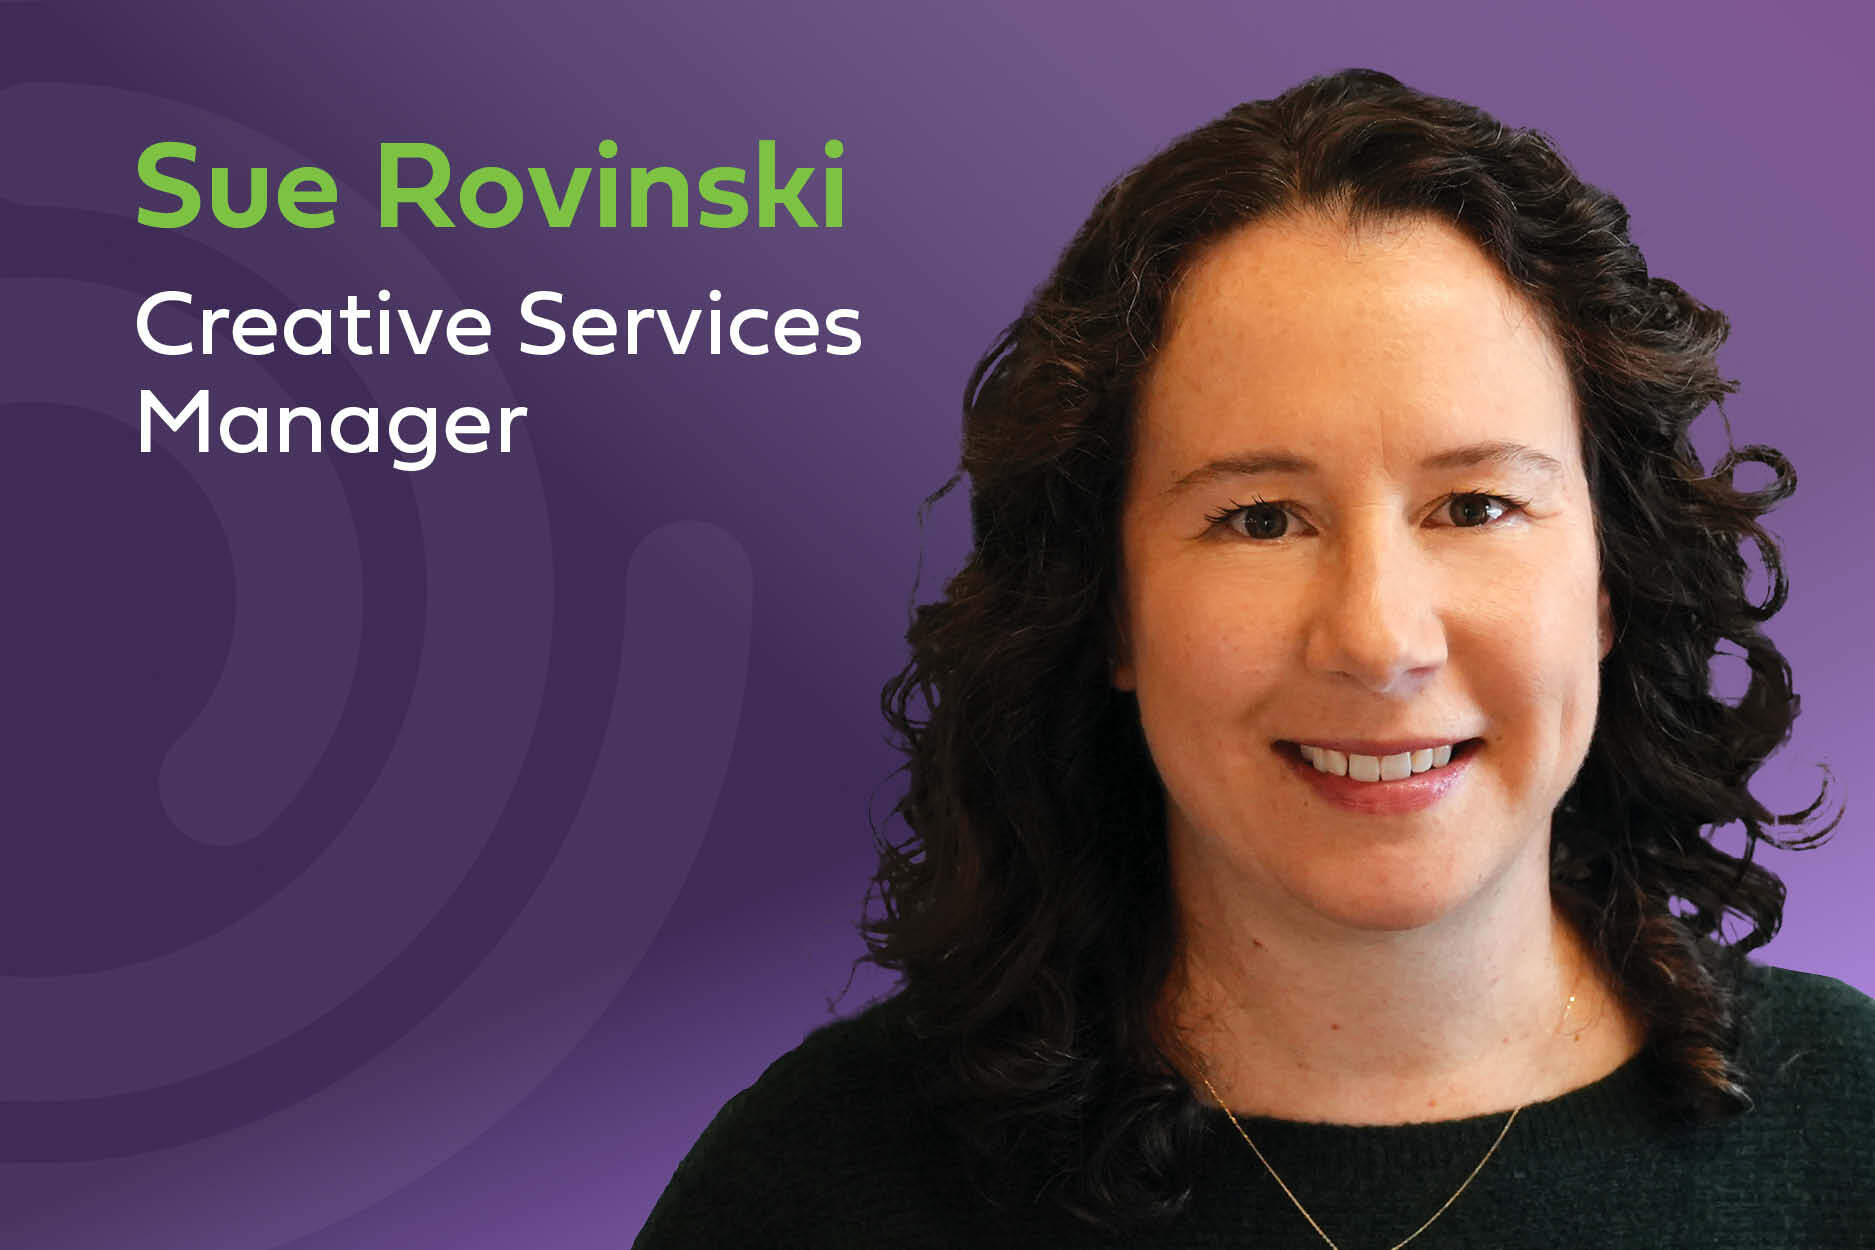 Featuring Sue Rovinski, Creative Services Manager of BioTouch